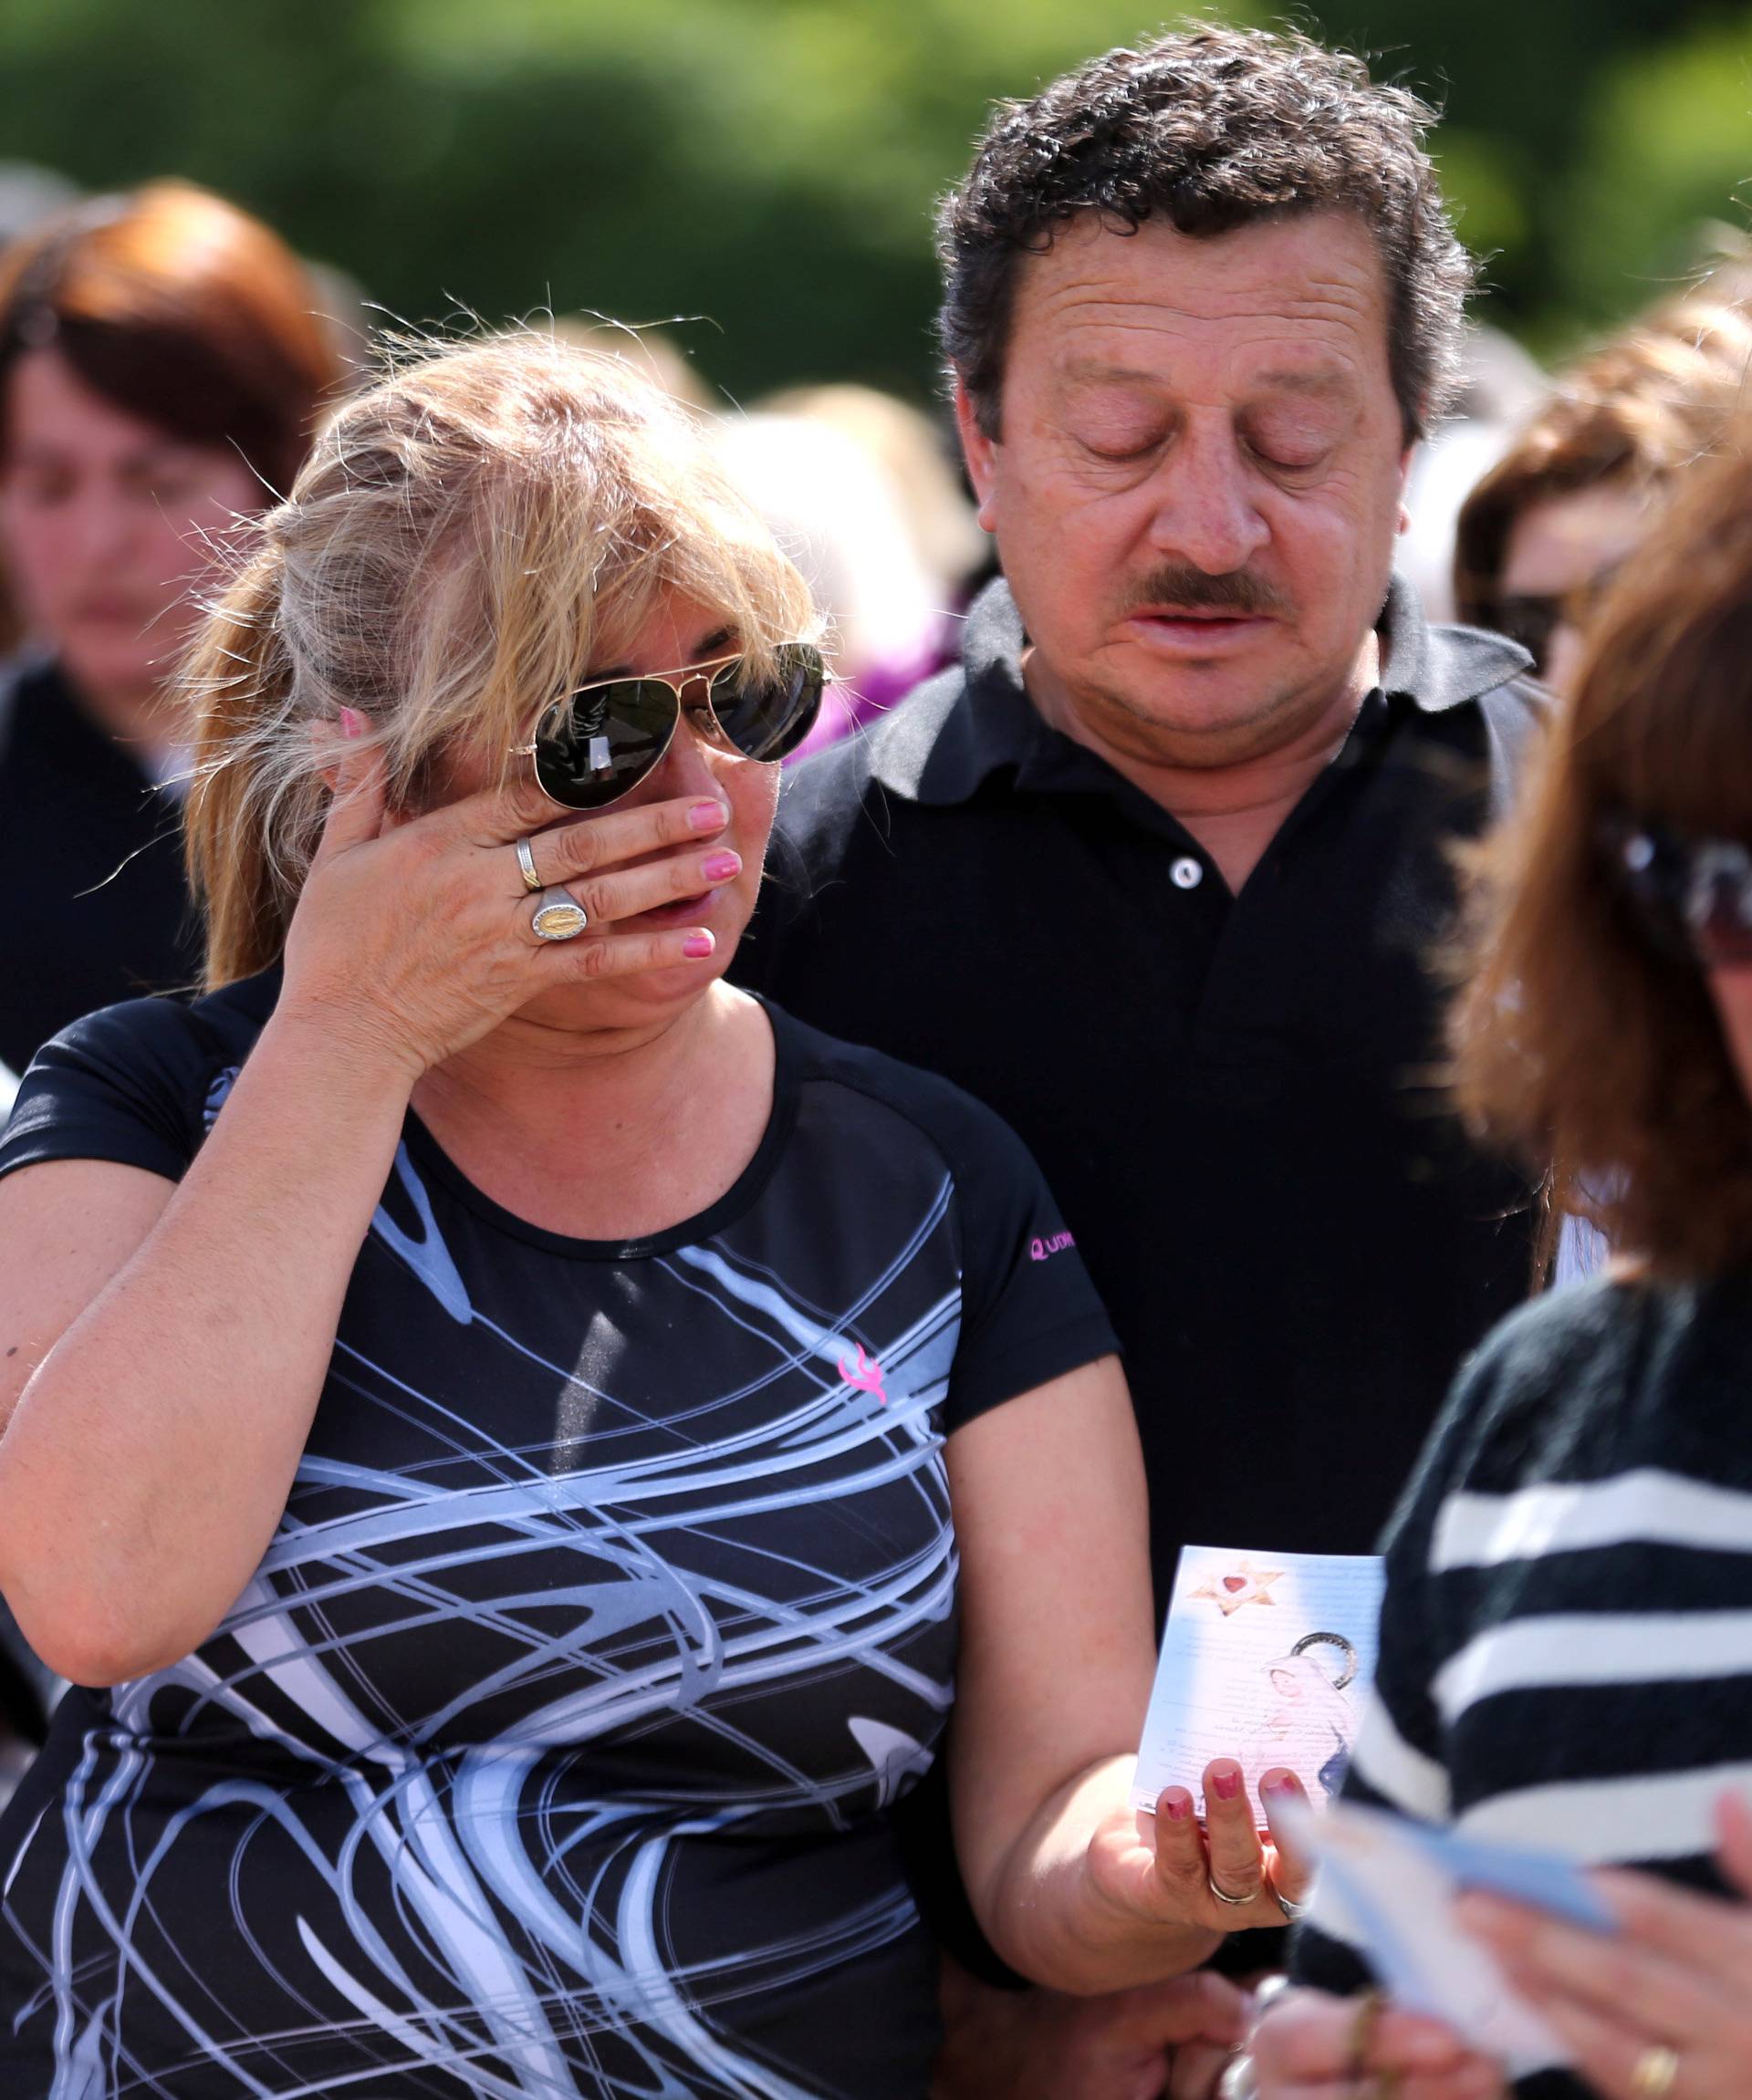 A woman reacts as people gather to pray for the 44 crew members of the missing at sea ARA San Juan submarine, at the entrance of an Argentine Naval Base in Mar del Plata